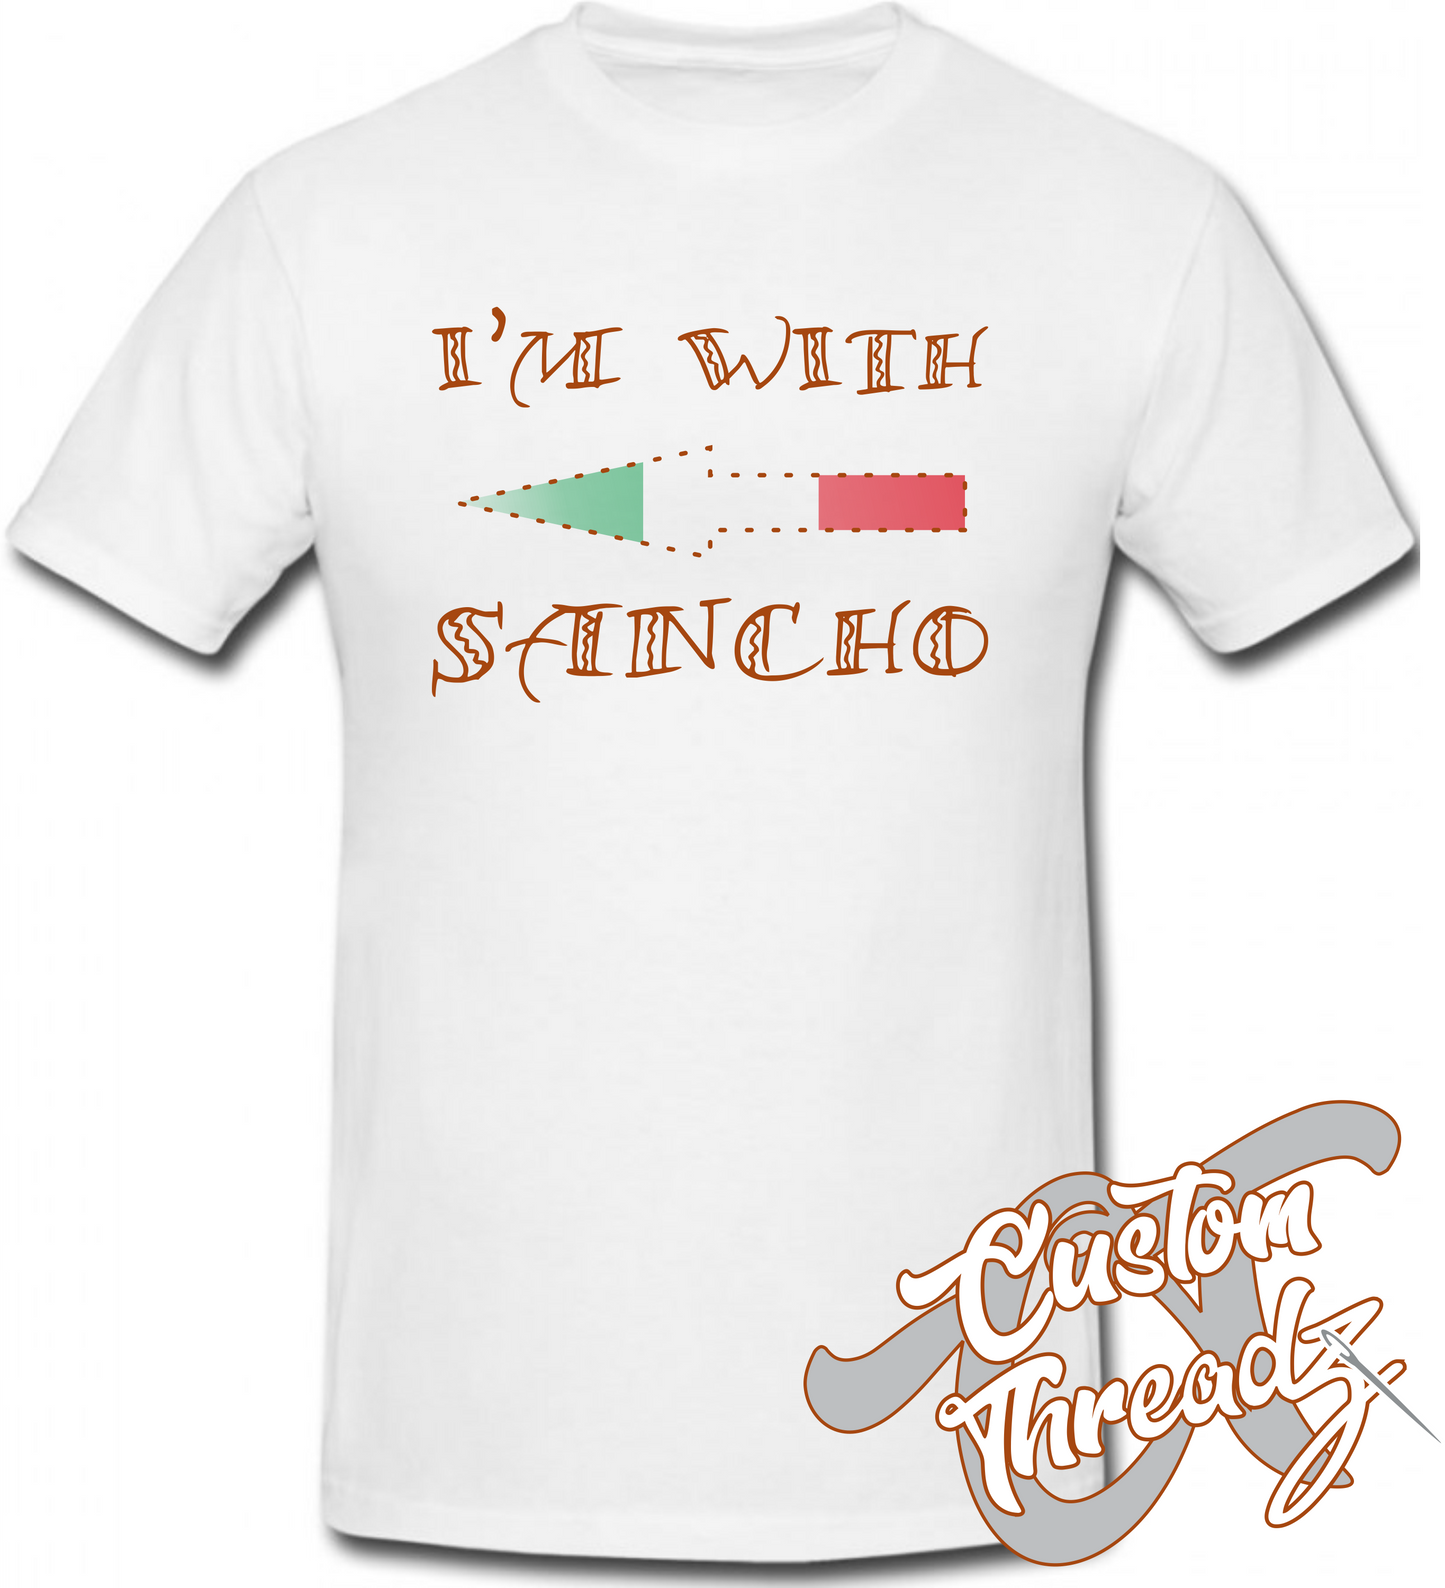 white tee with im with sancho DTG printed design